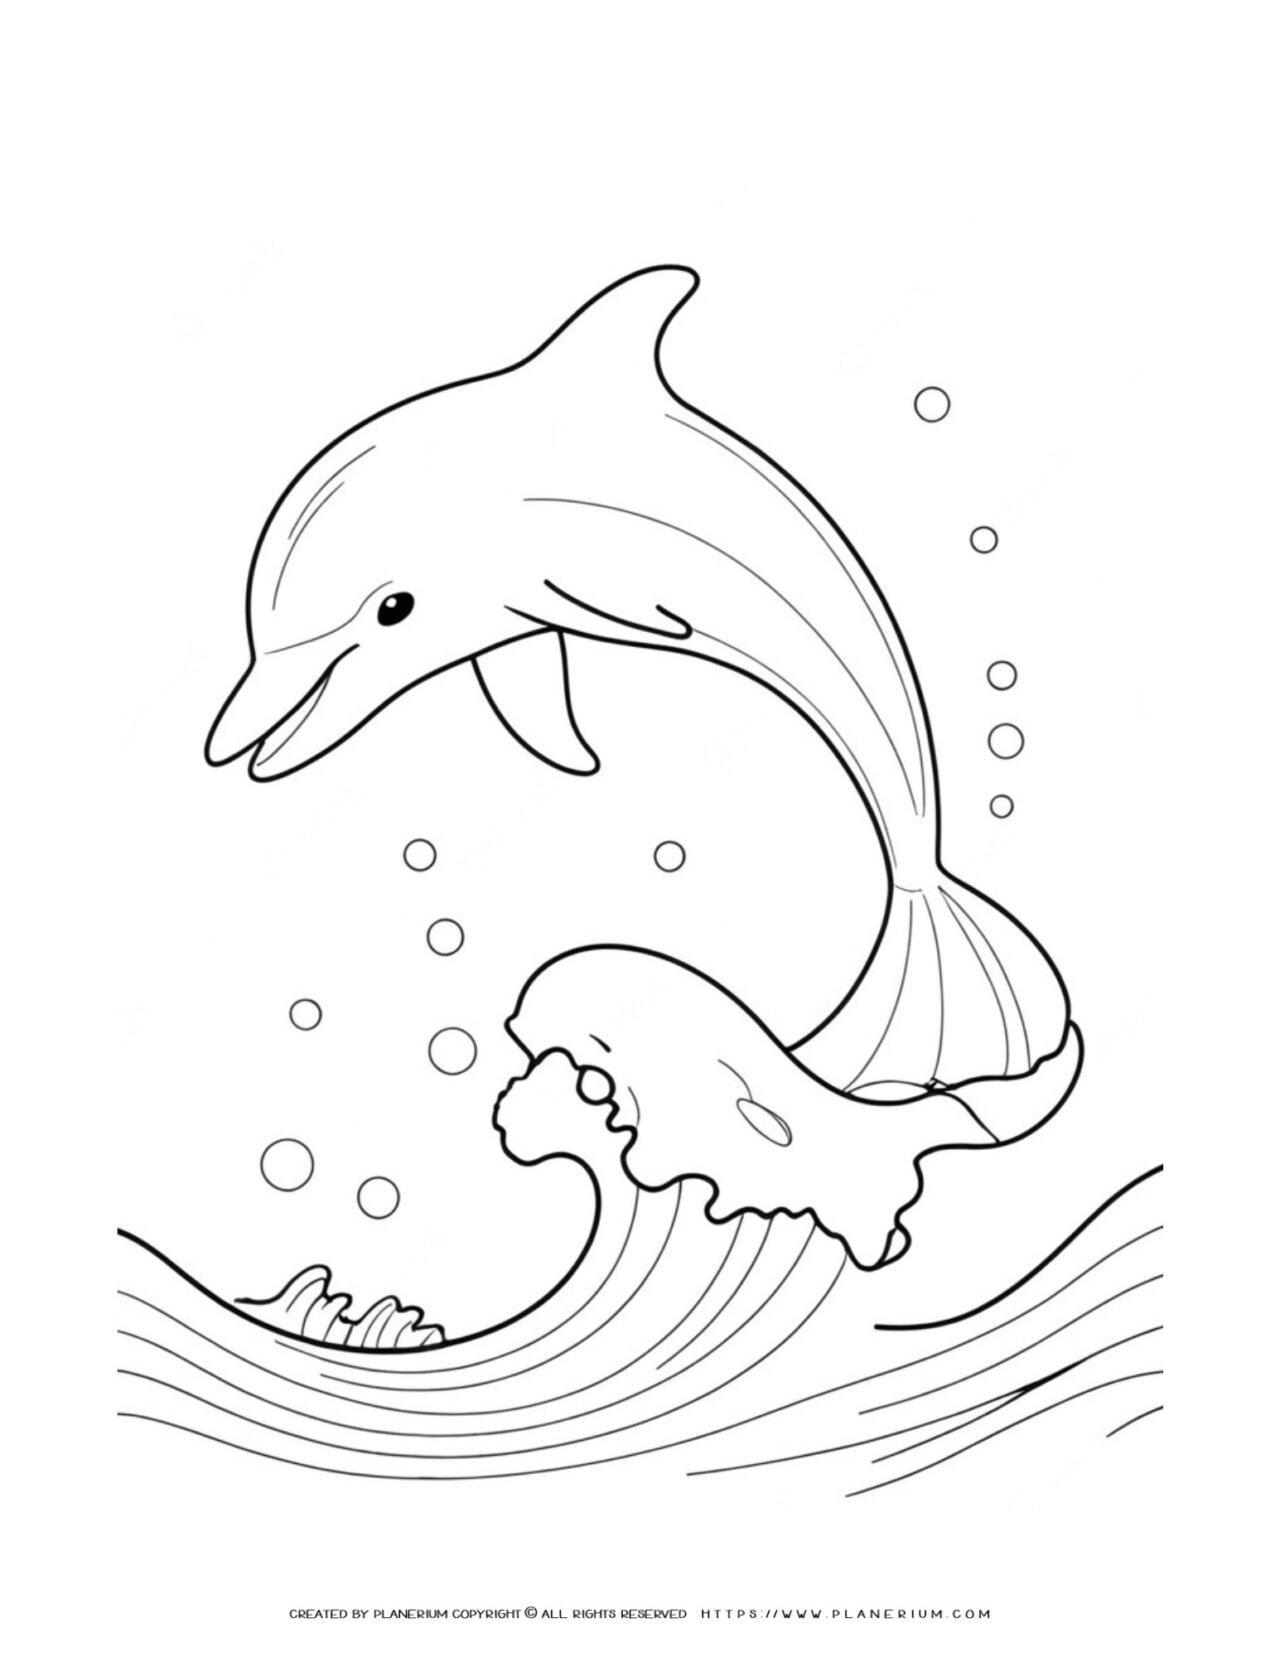 Dolphin-coloring-page-for-childrens-activity